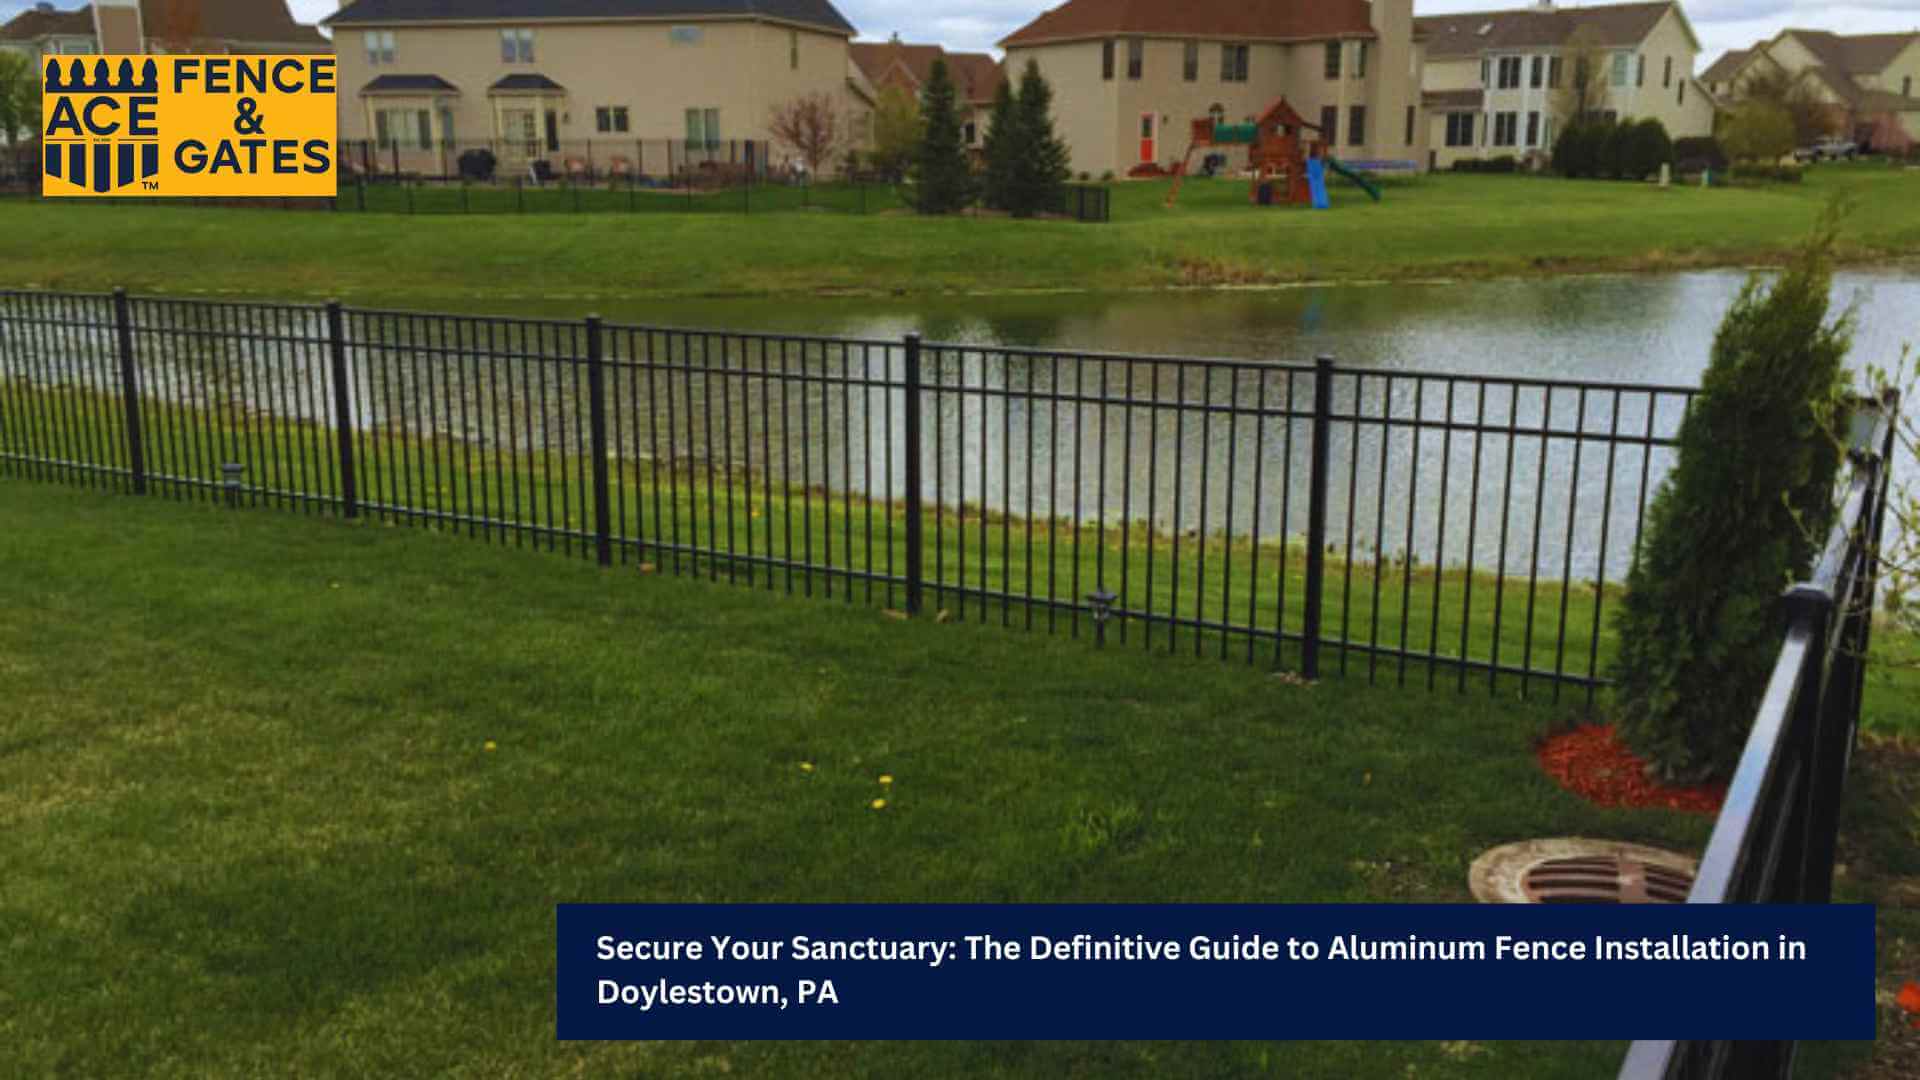 Secure Your Sanctuary: The Definitive Guide to Aluminum Fence Installation in Doylestown, PA